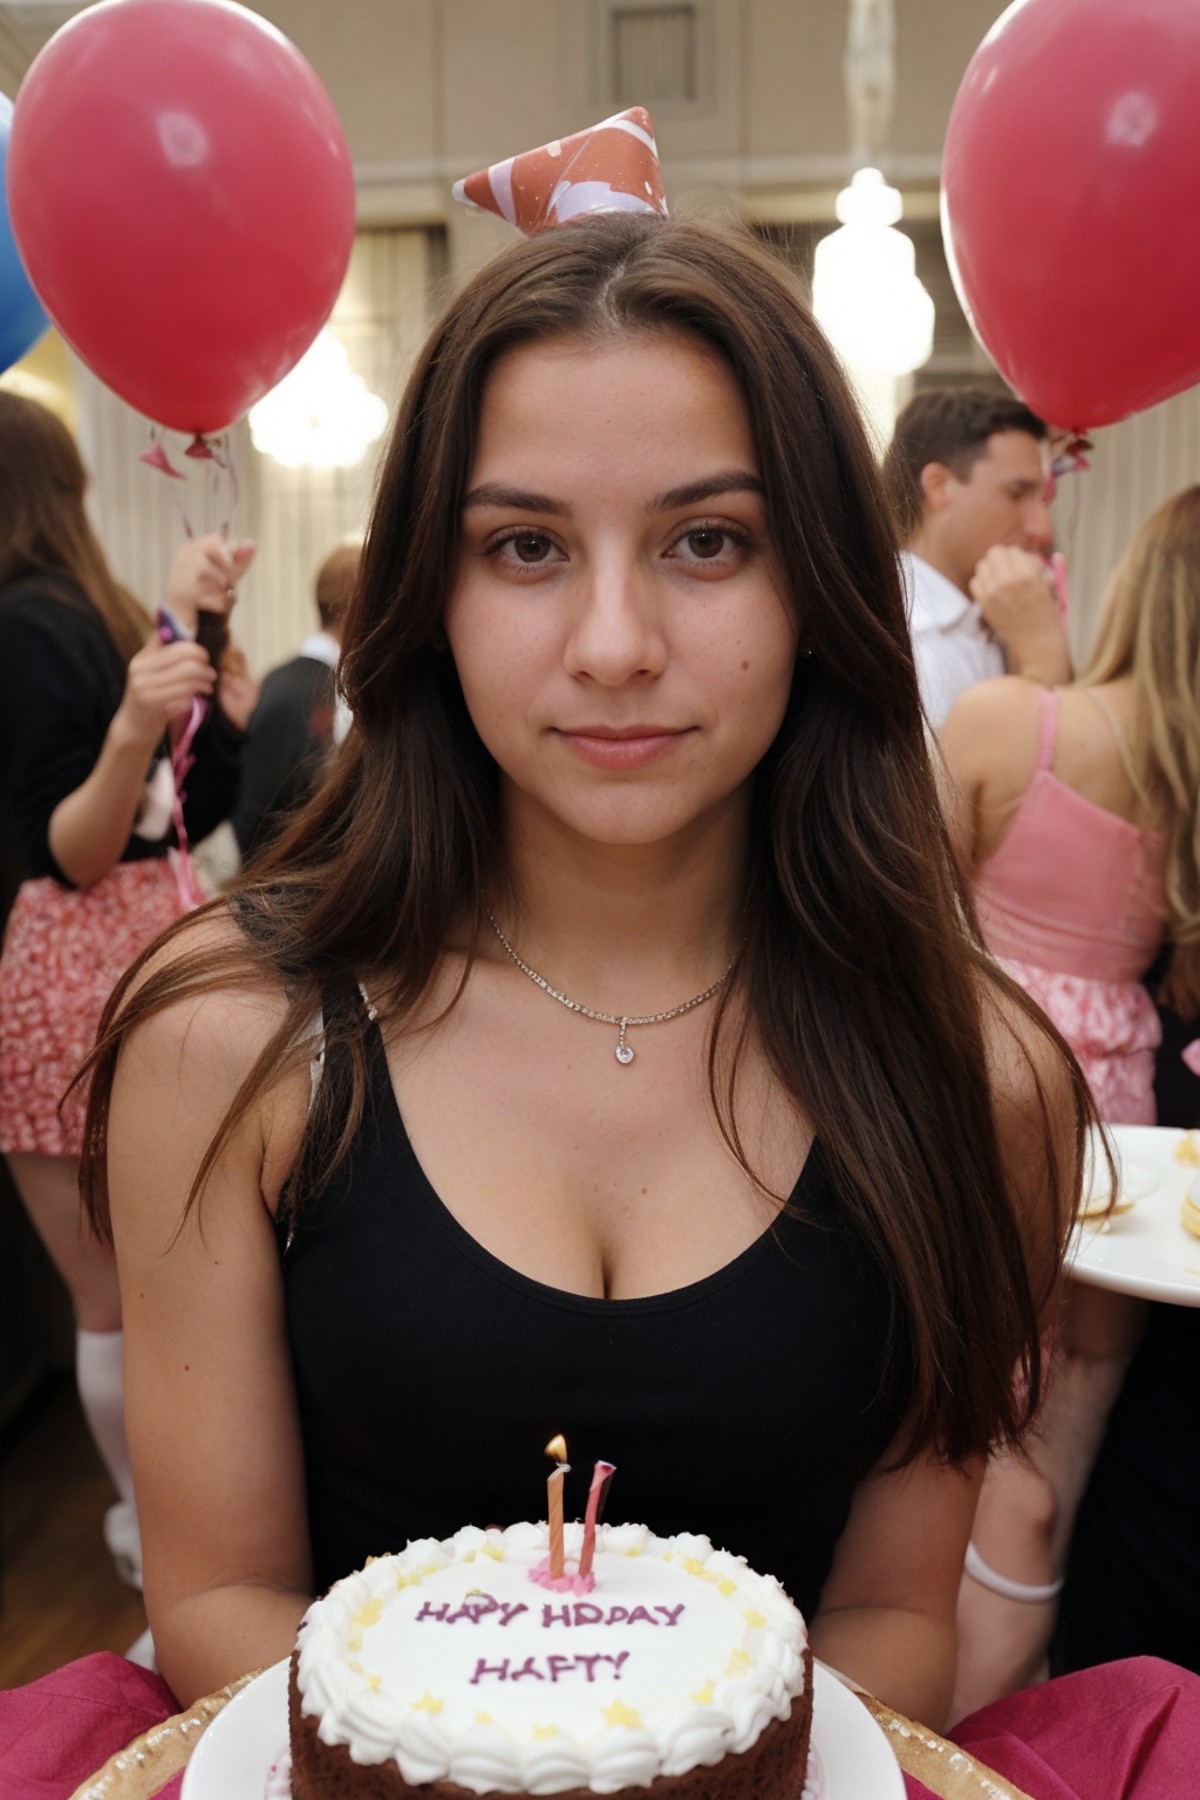 young below average woman, birthday party, cake, people in background